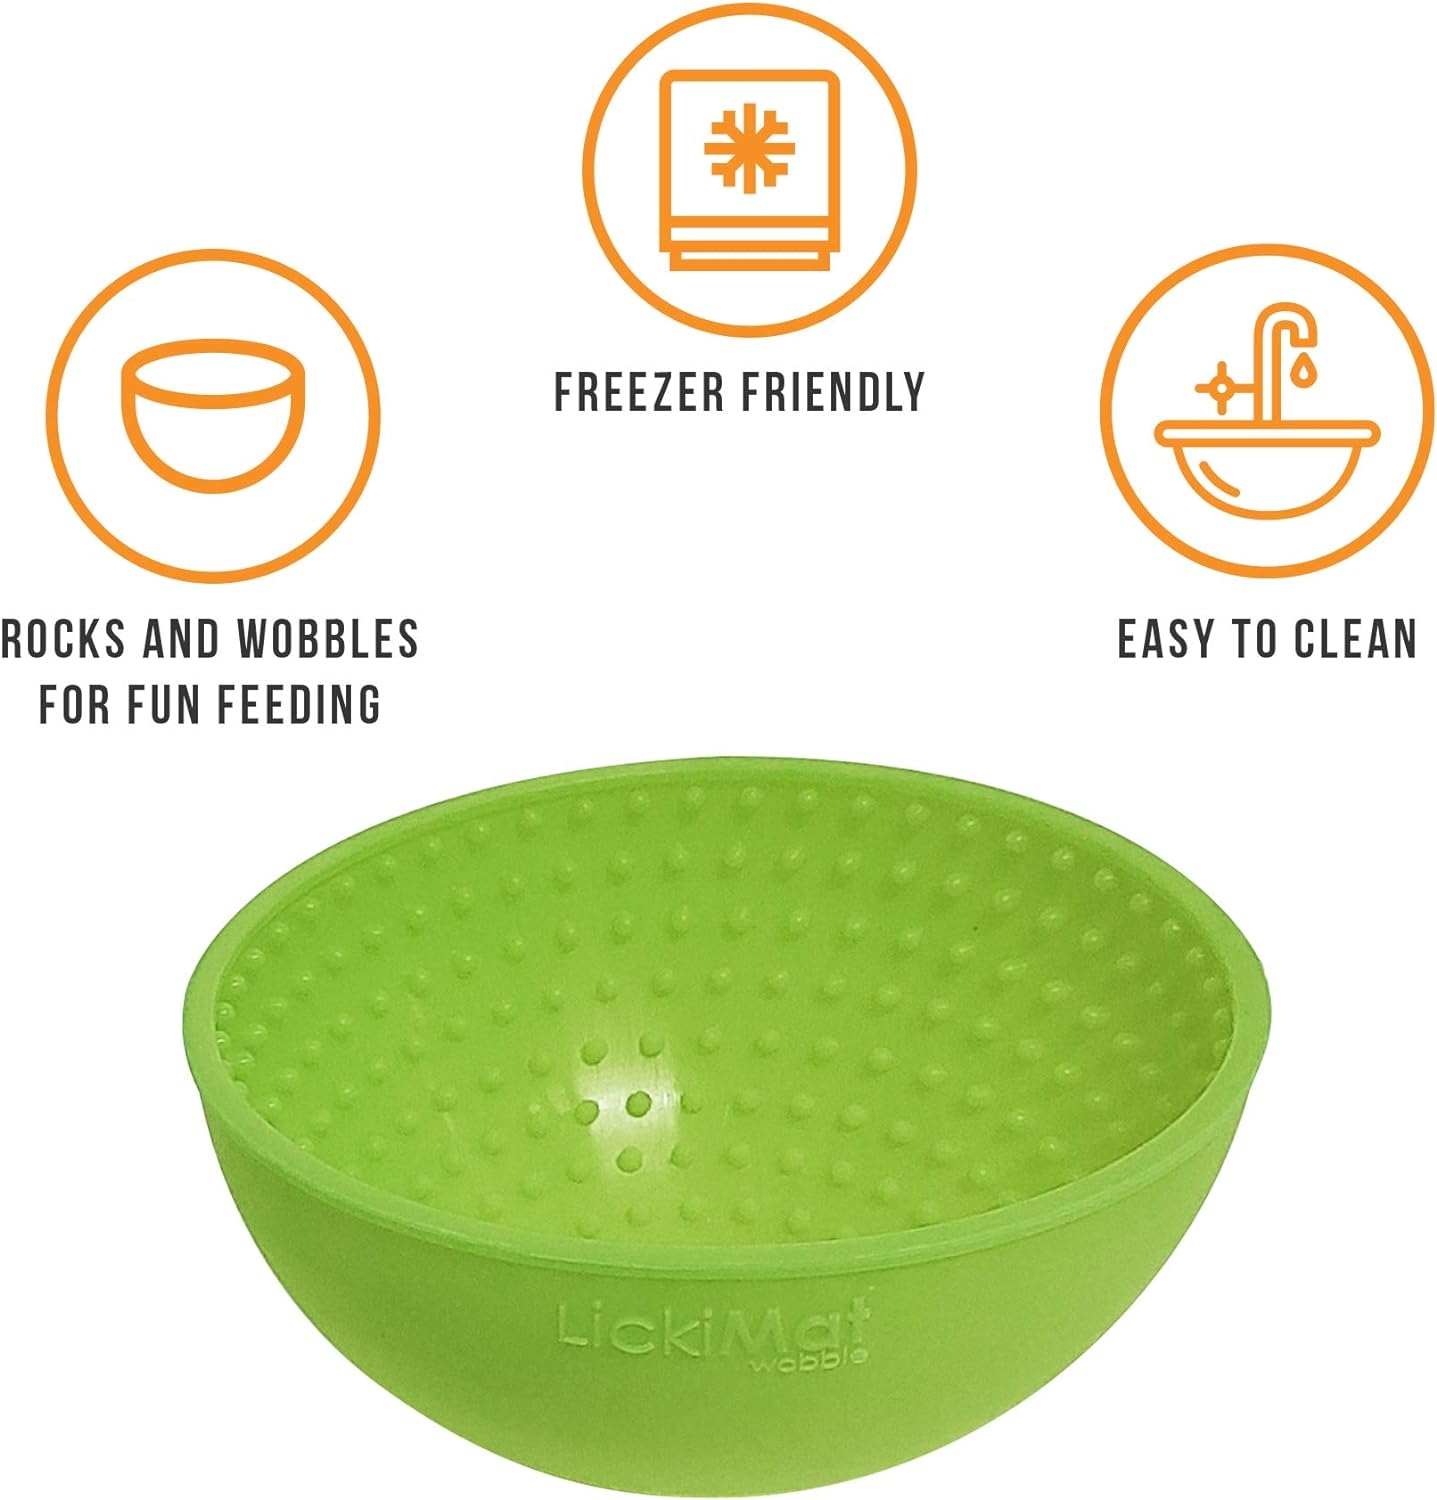 Hyper Pet LickiMat Wobble (Boredom Buster, Slow Feeder & Anxiety Relief (Dog Bowl & cat Bowl-Great for Dog Food, Dog Treats,cat Food)[Great Alternative to Slow Feeder Dog Bowls-Snuffle Mat]